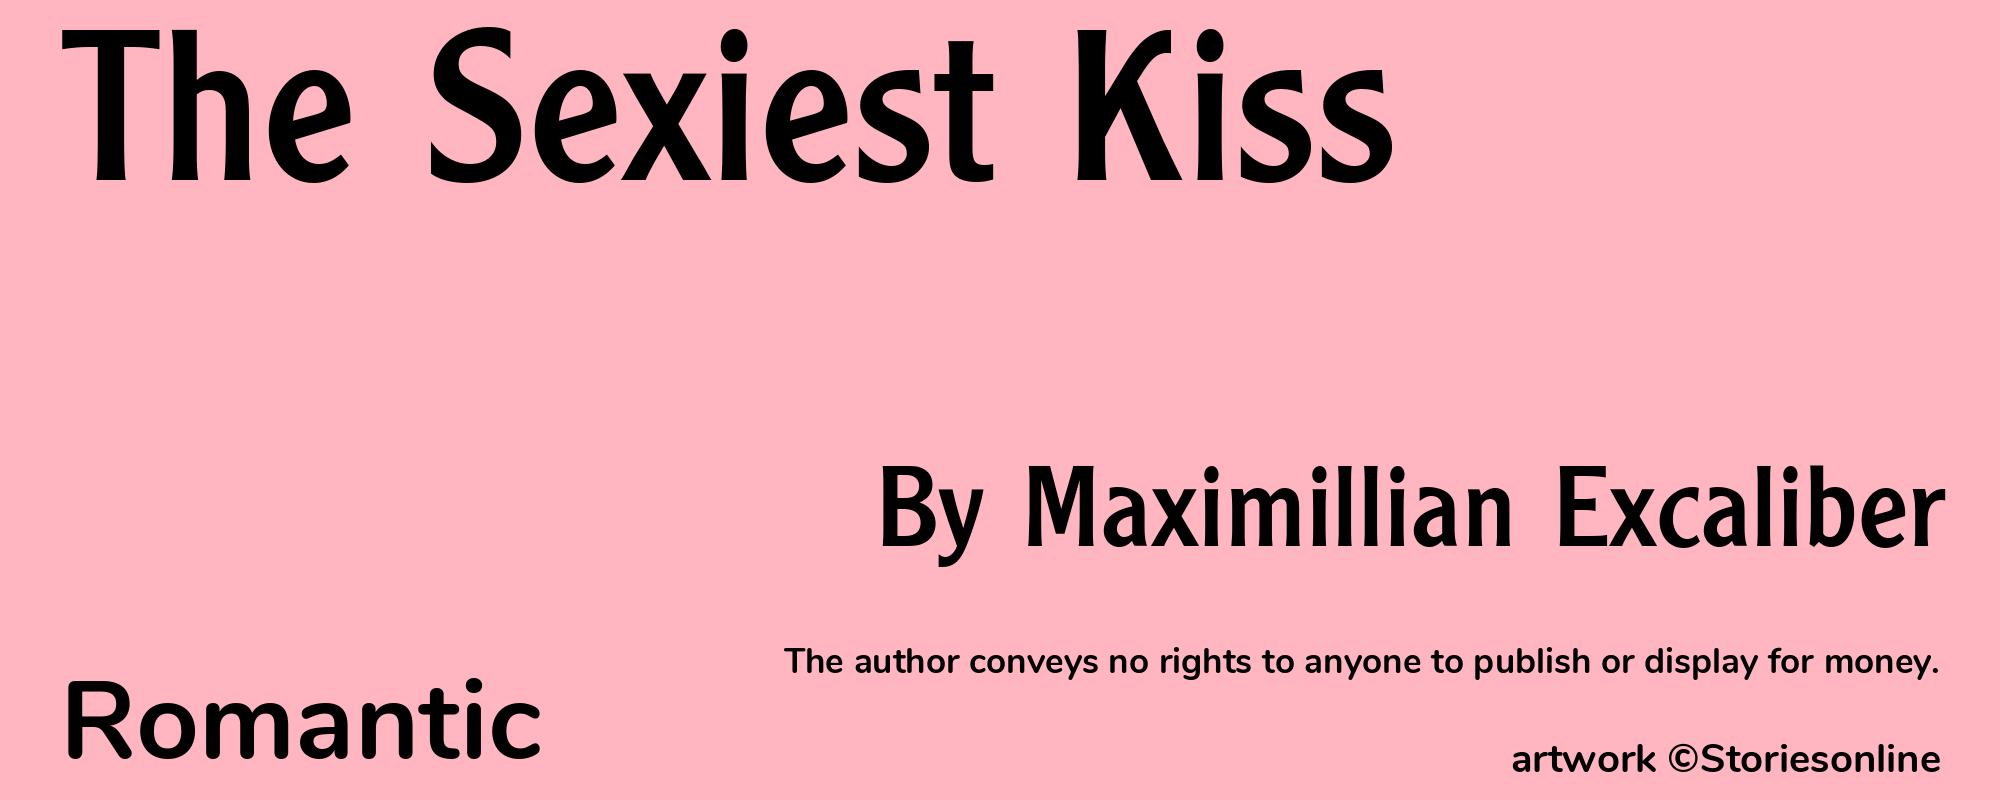 The Sexiest Kiss - Cover